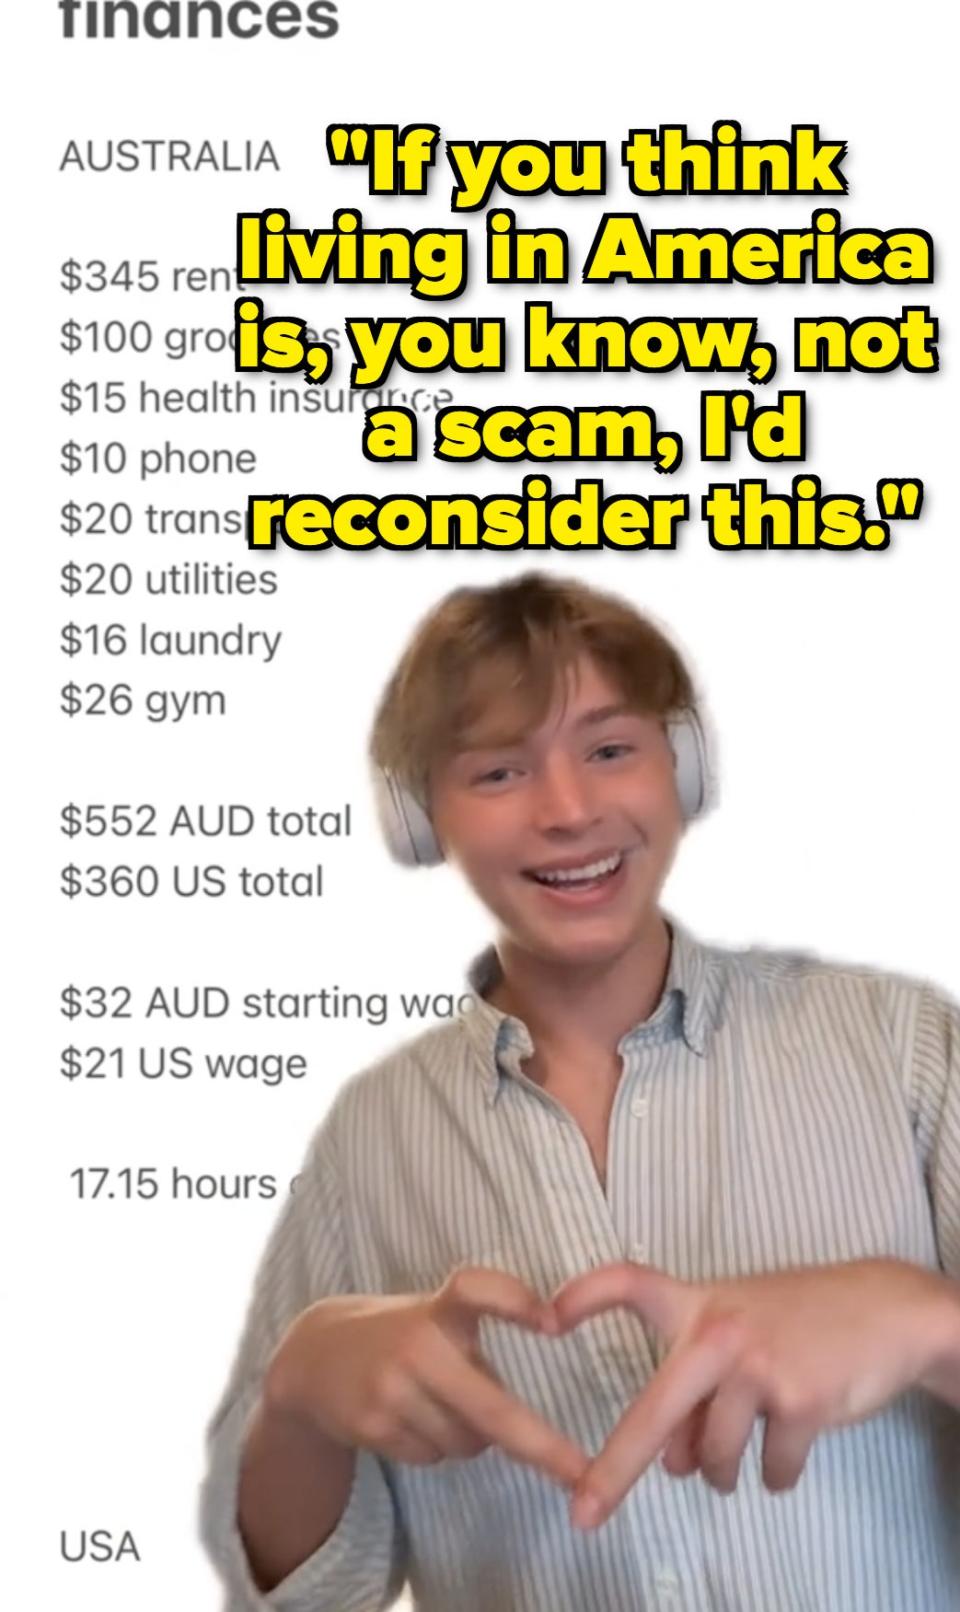 Person in striped shirt making a heart shape with hands, with a list of living expenses for Australia and USA in the background